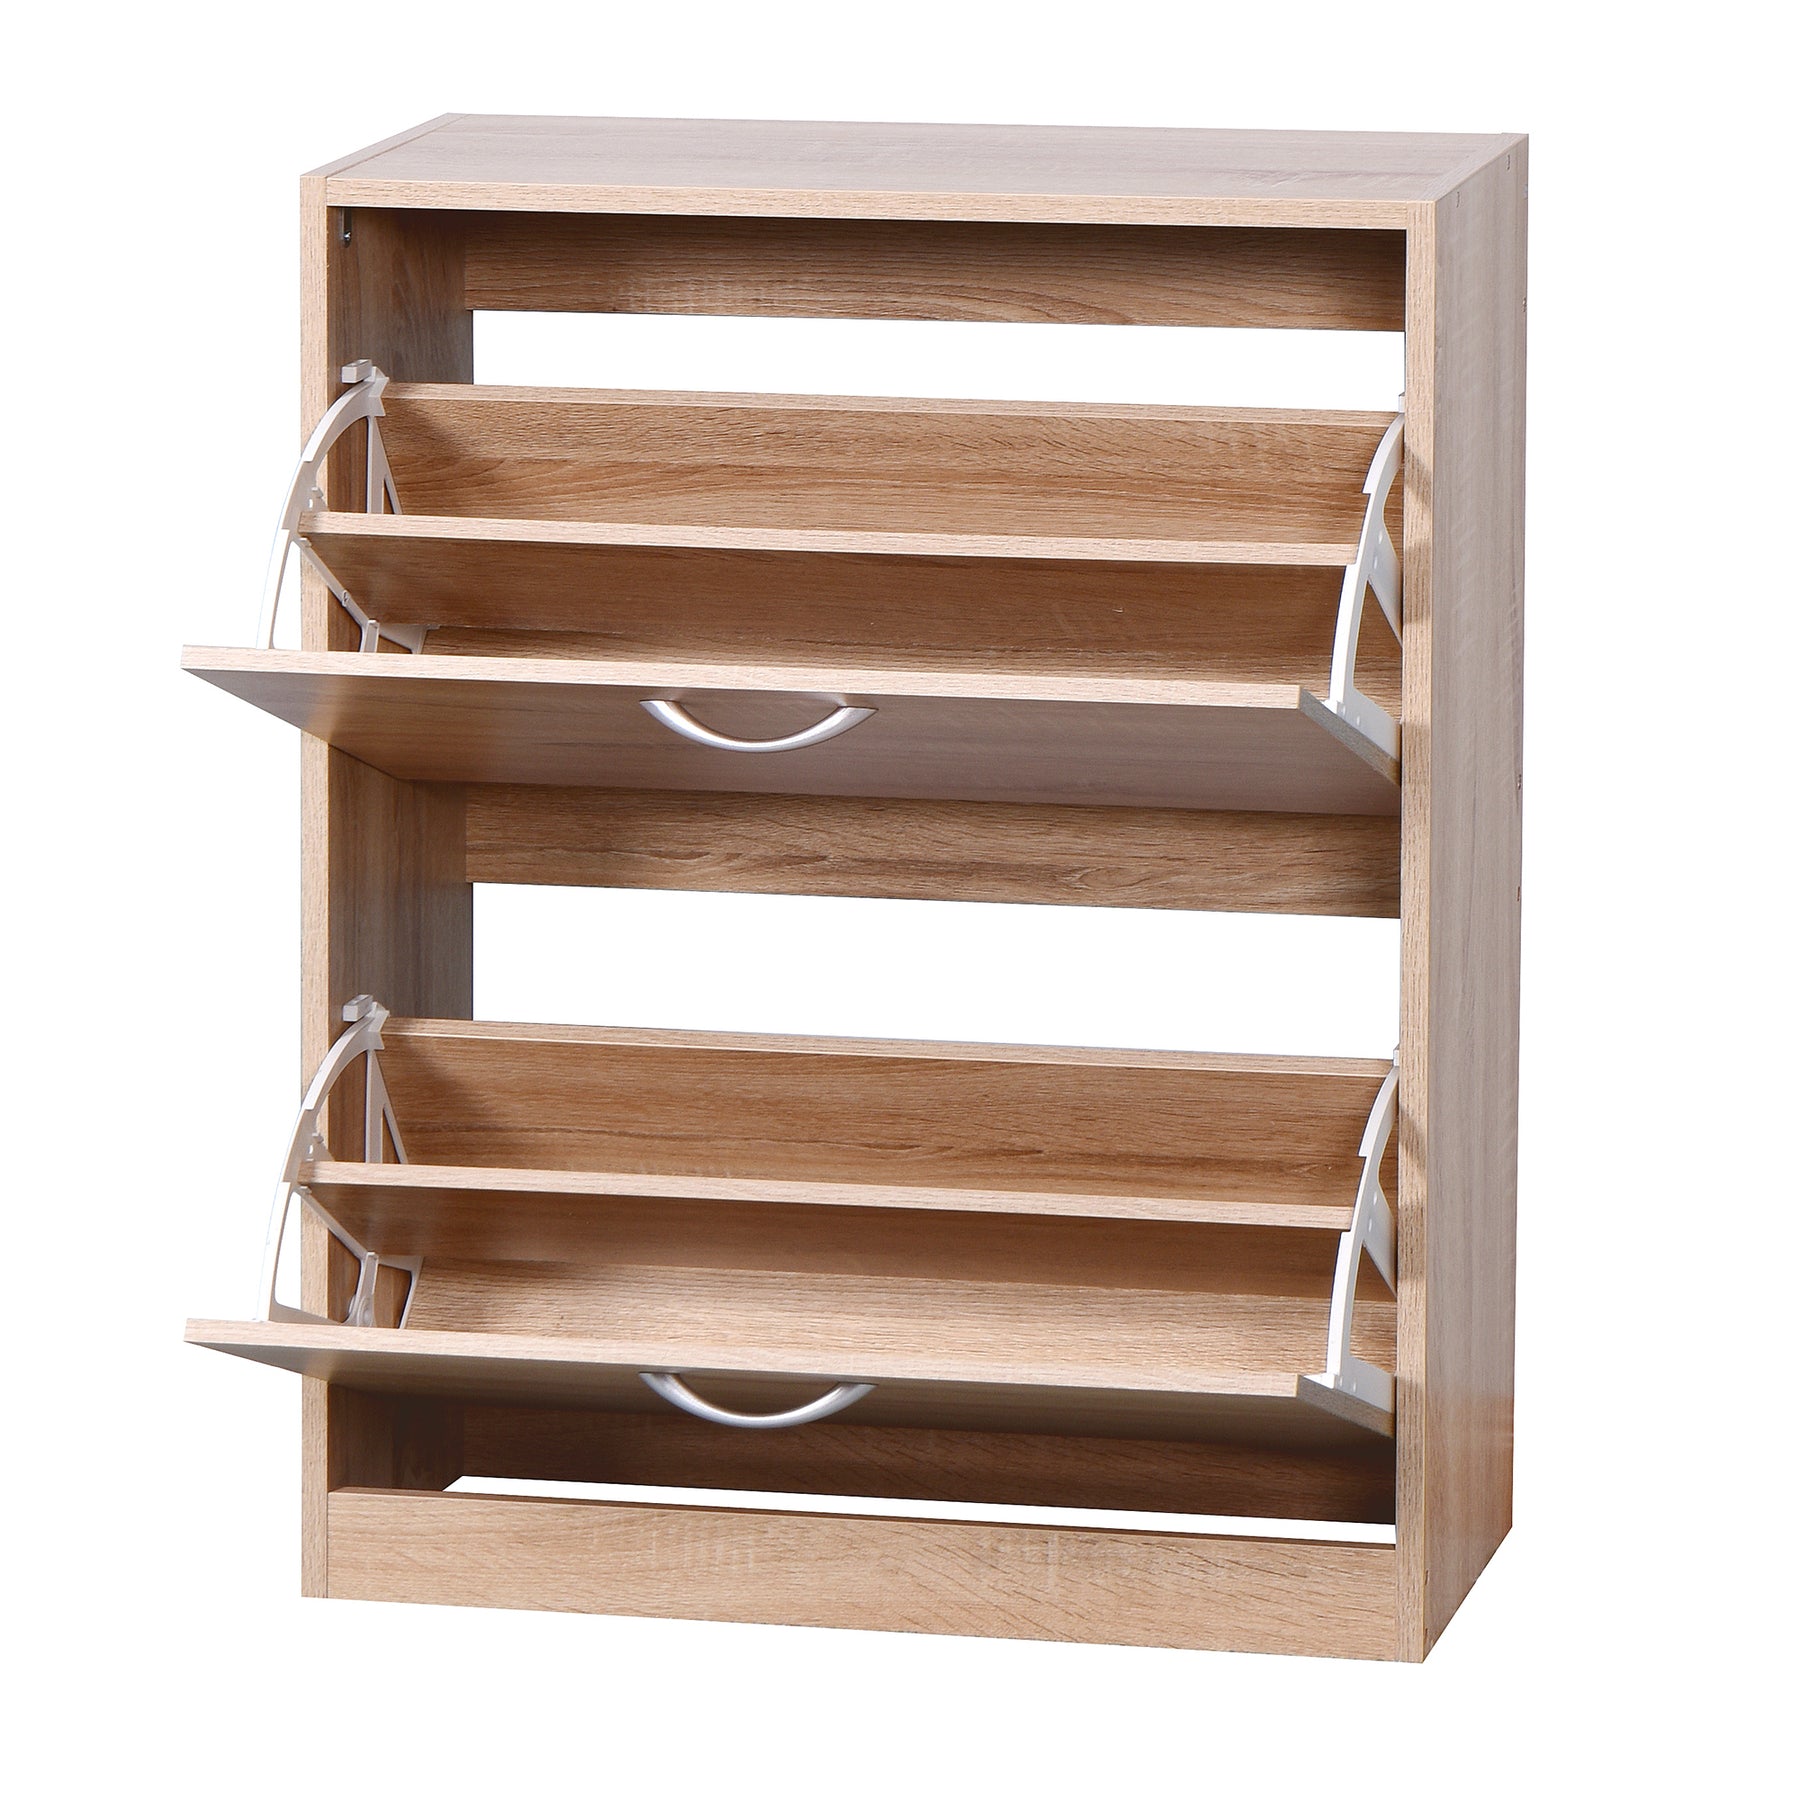 Shoe Cabinet with 4 Flip Drawers, Entryway Shoe Storage Cabinet